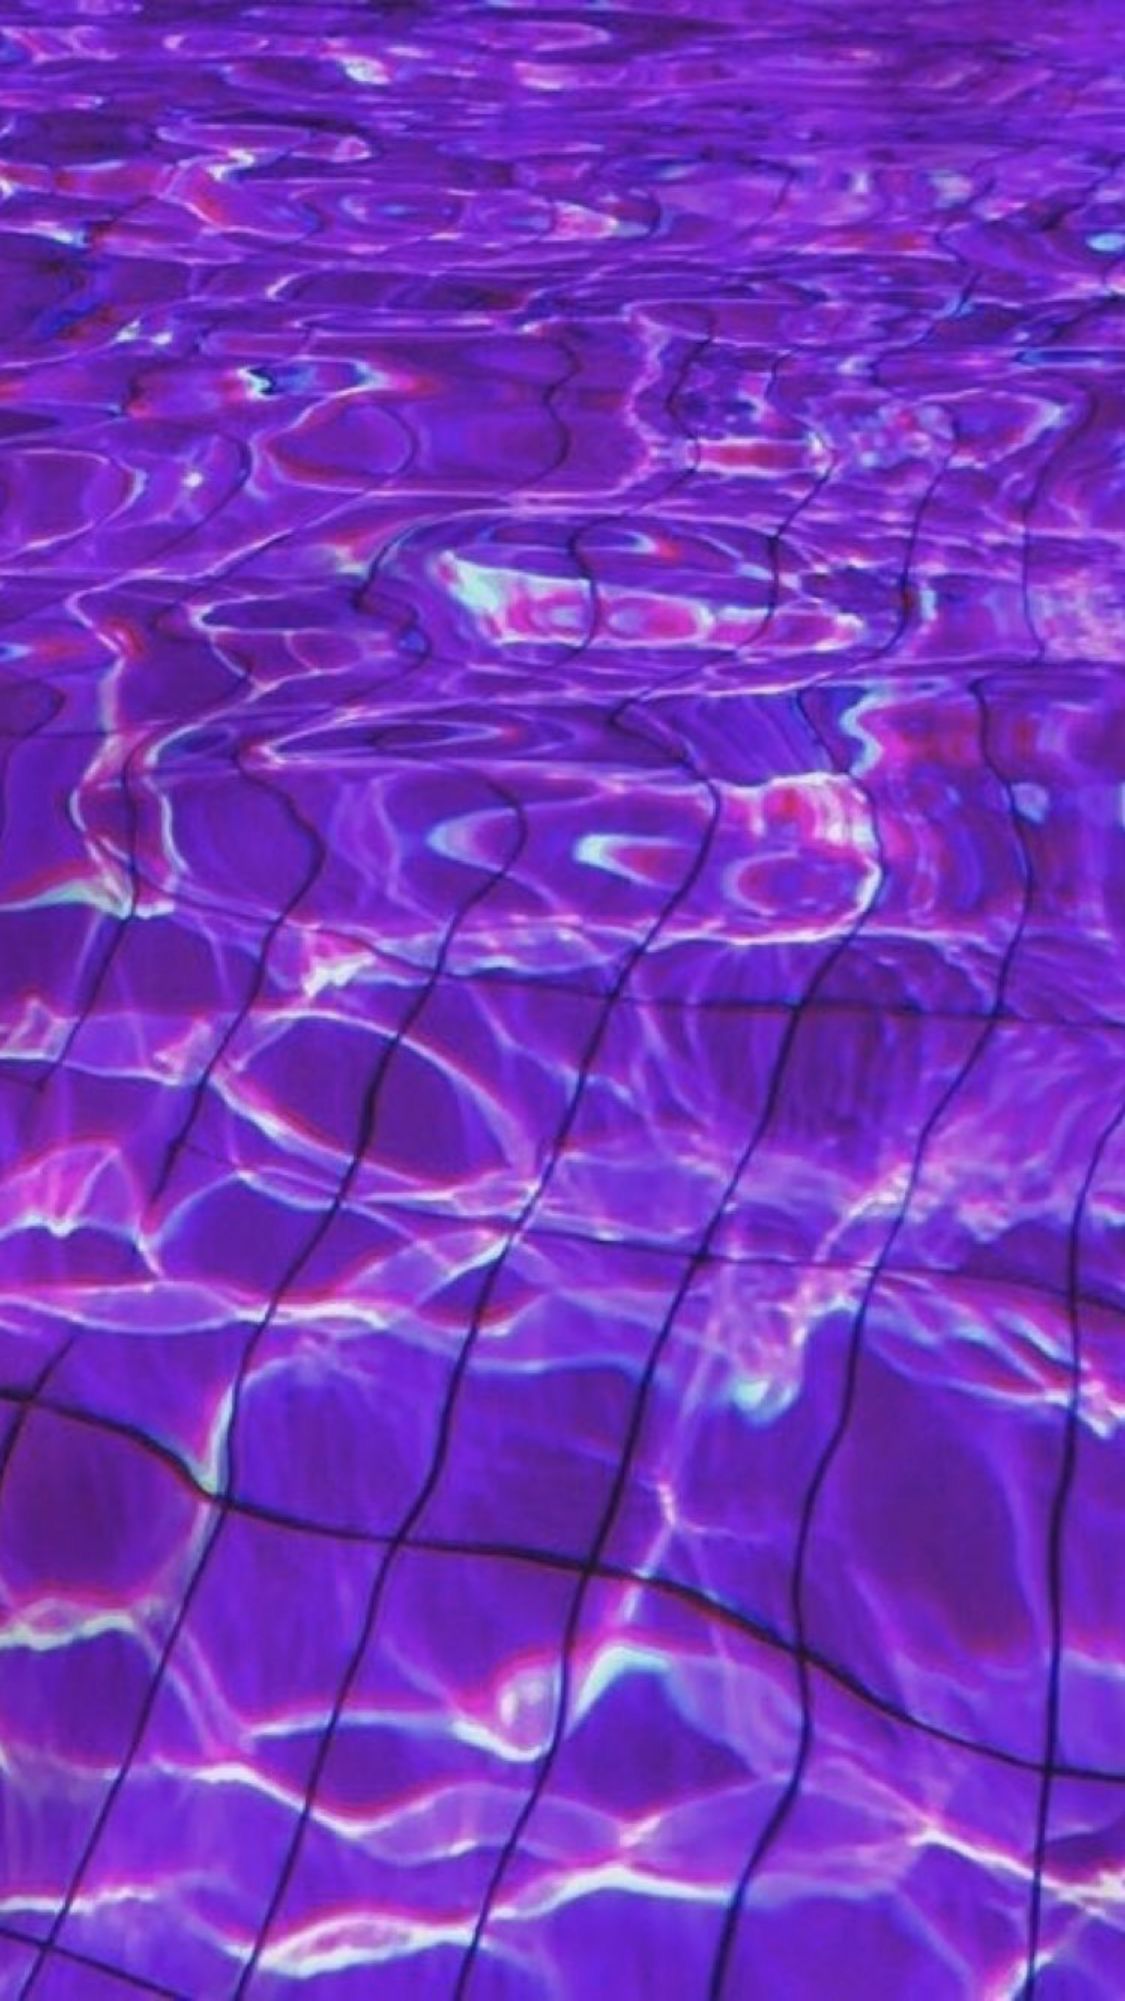 A pool with a purple and blue color scheme - Swimming pool, water